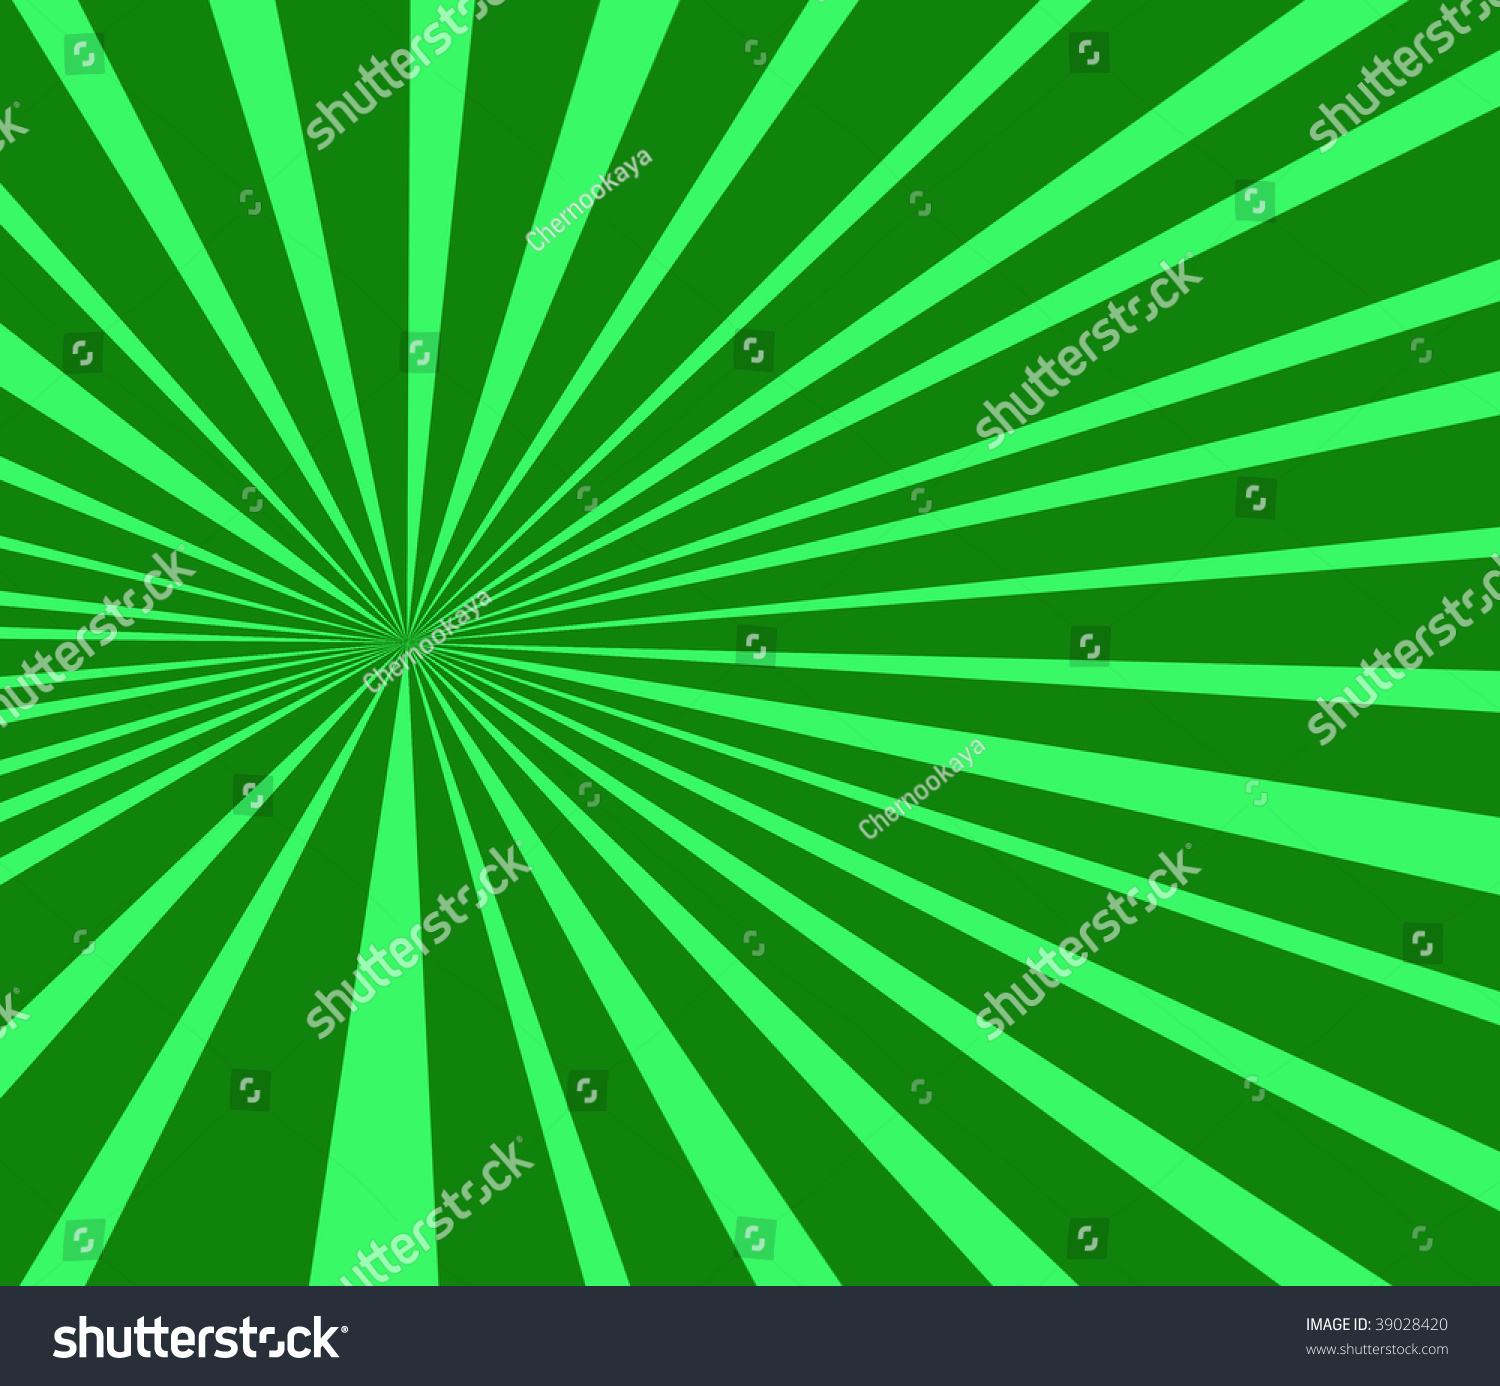 Green Background Line Abstract Stock Photo 39028420 : Shutterstock